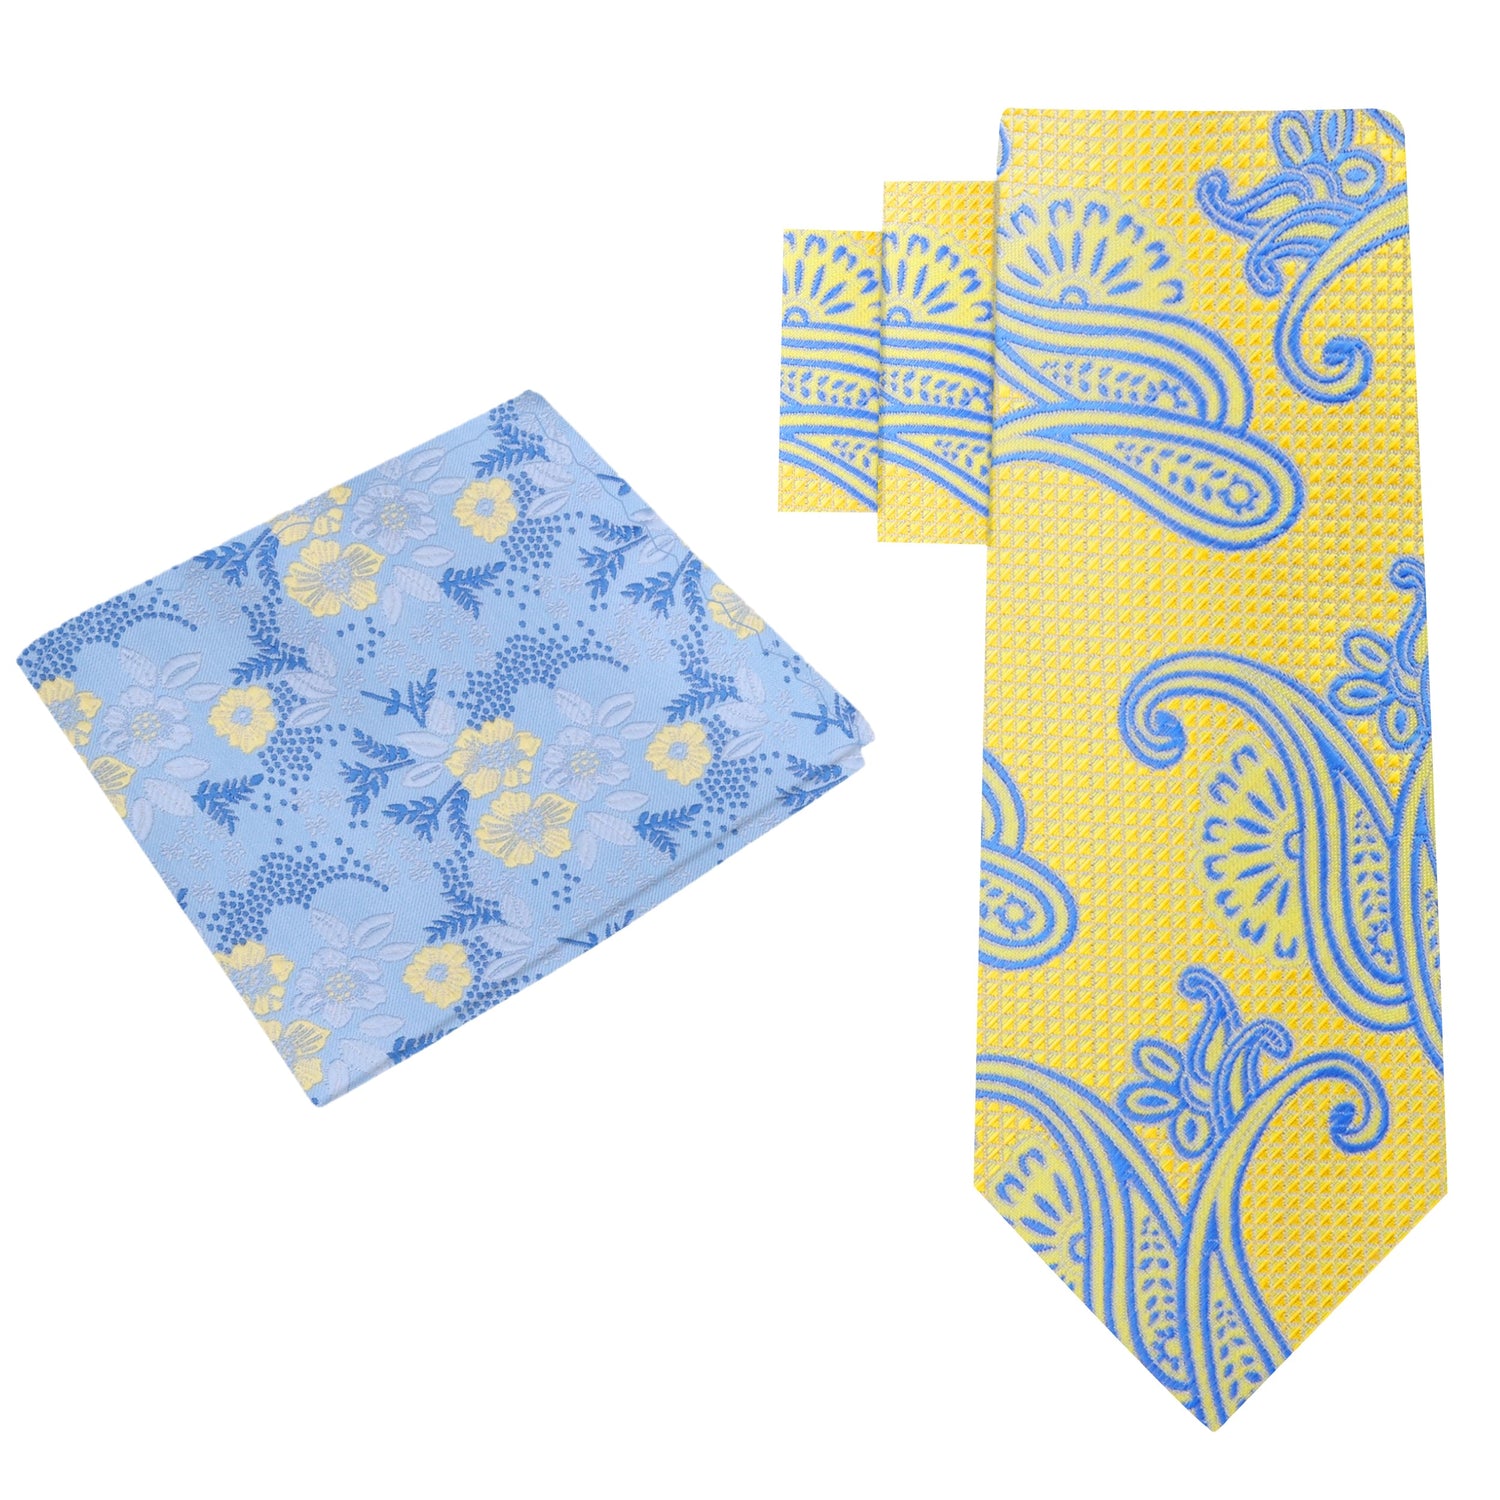 Alt View: Yellow and Light Blue Paisley Tie and Light Blue, Yellow Floral Square